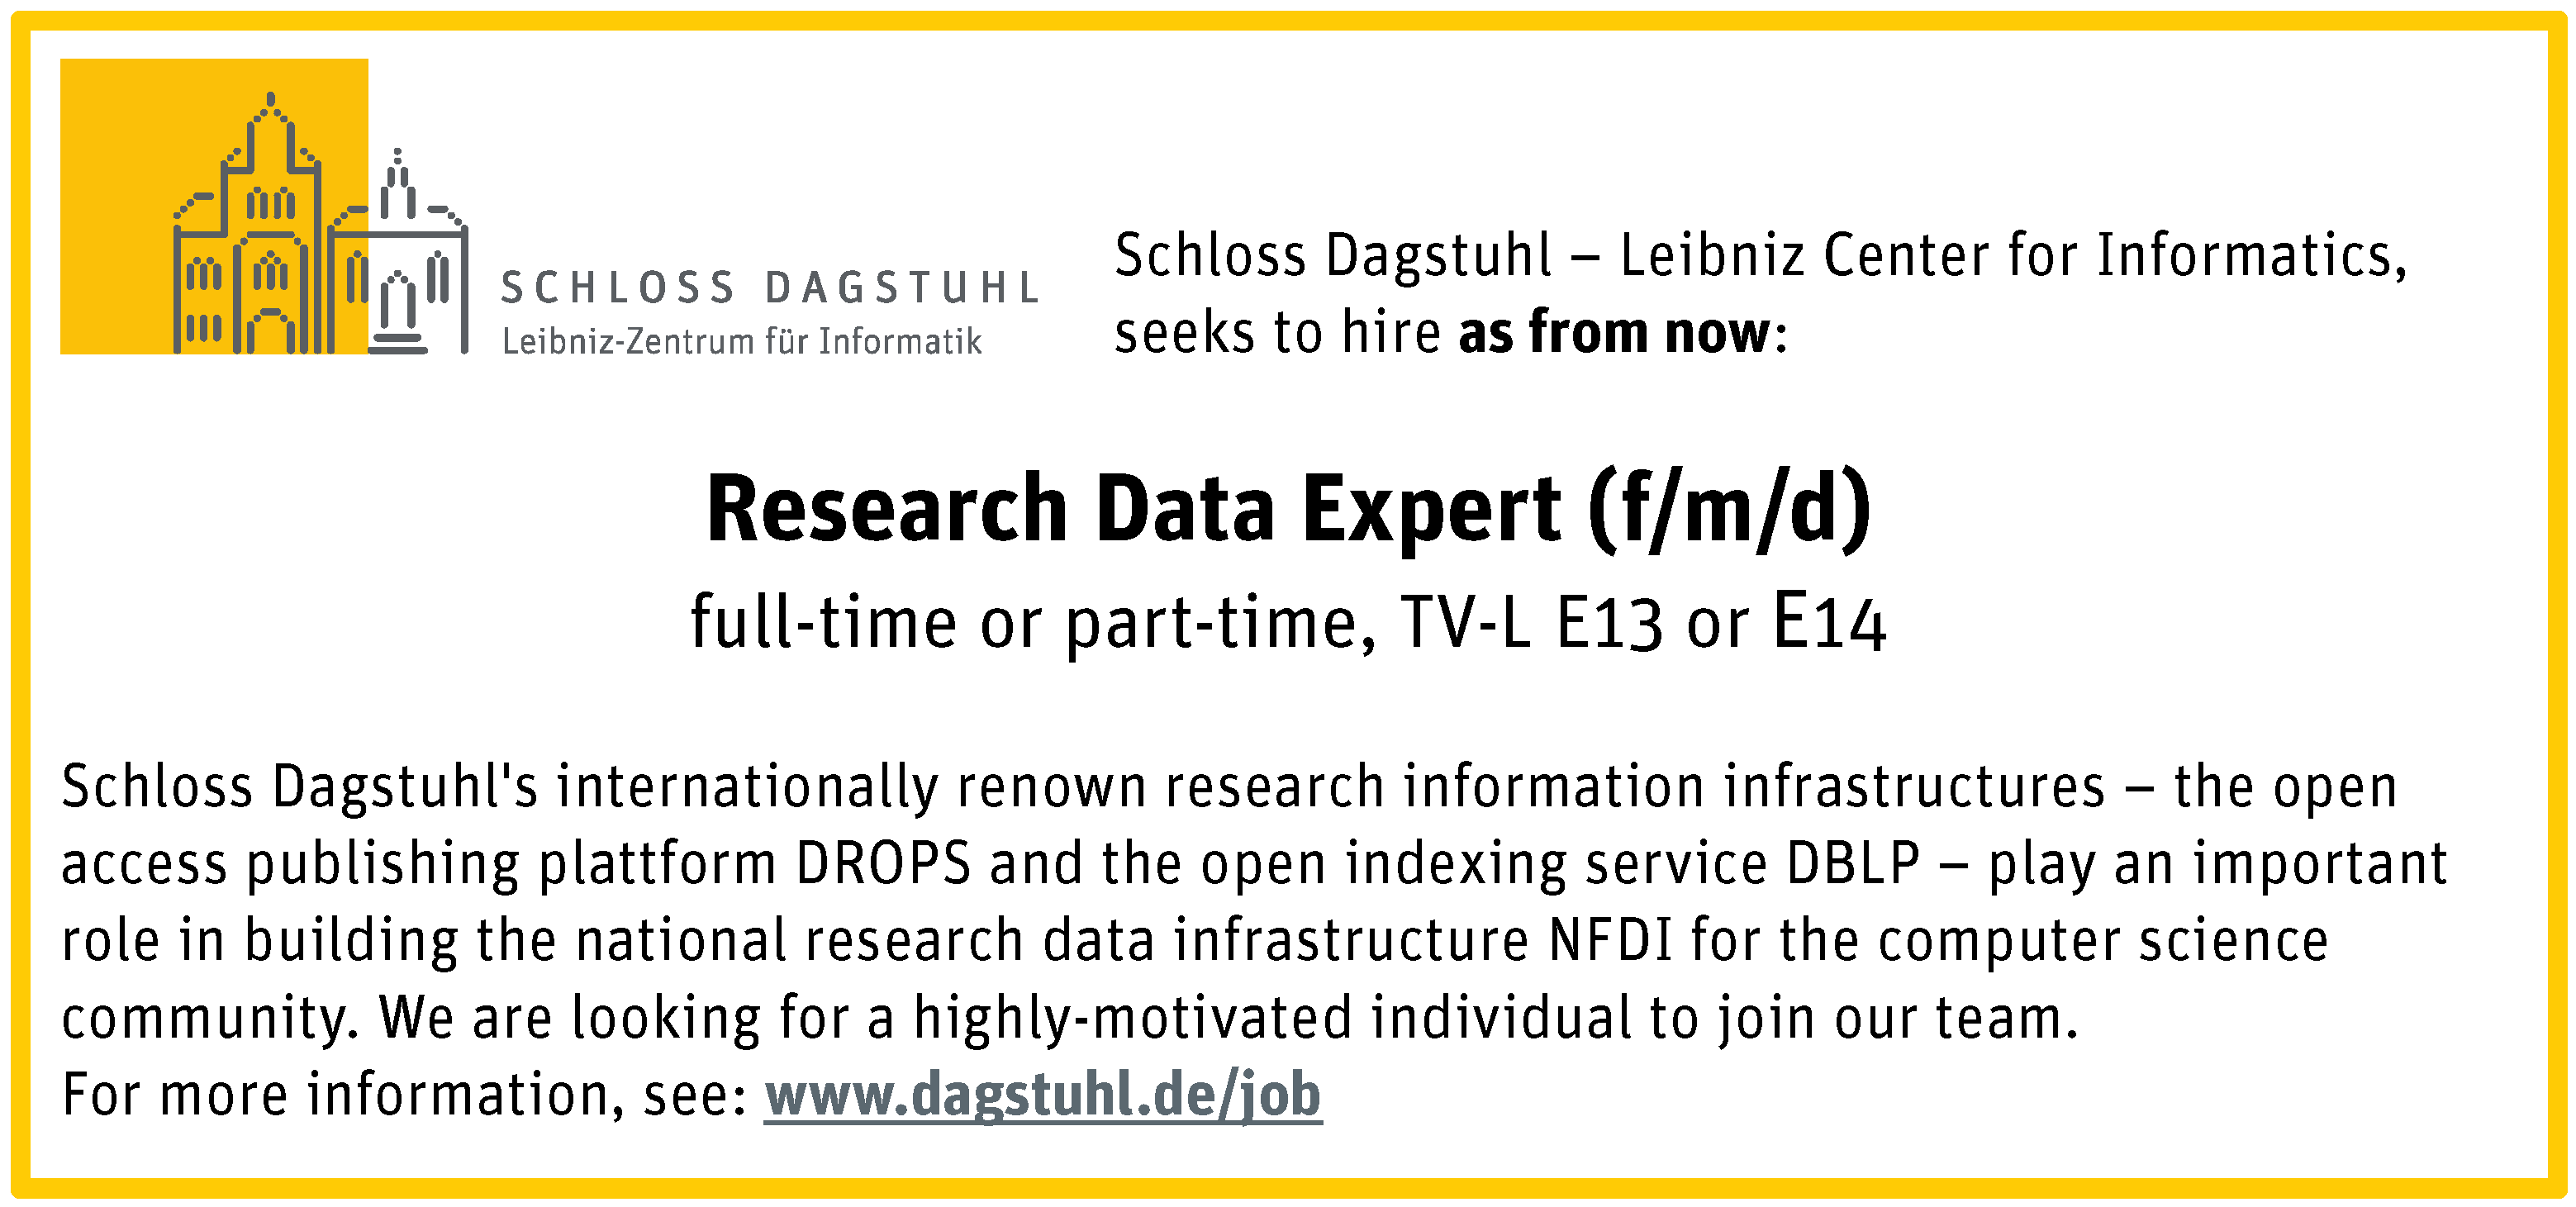 Article Image: Research Data Expert (f/m/d), full-time or part-time, TV-L E13 or E14